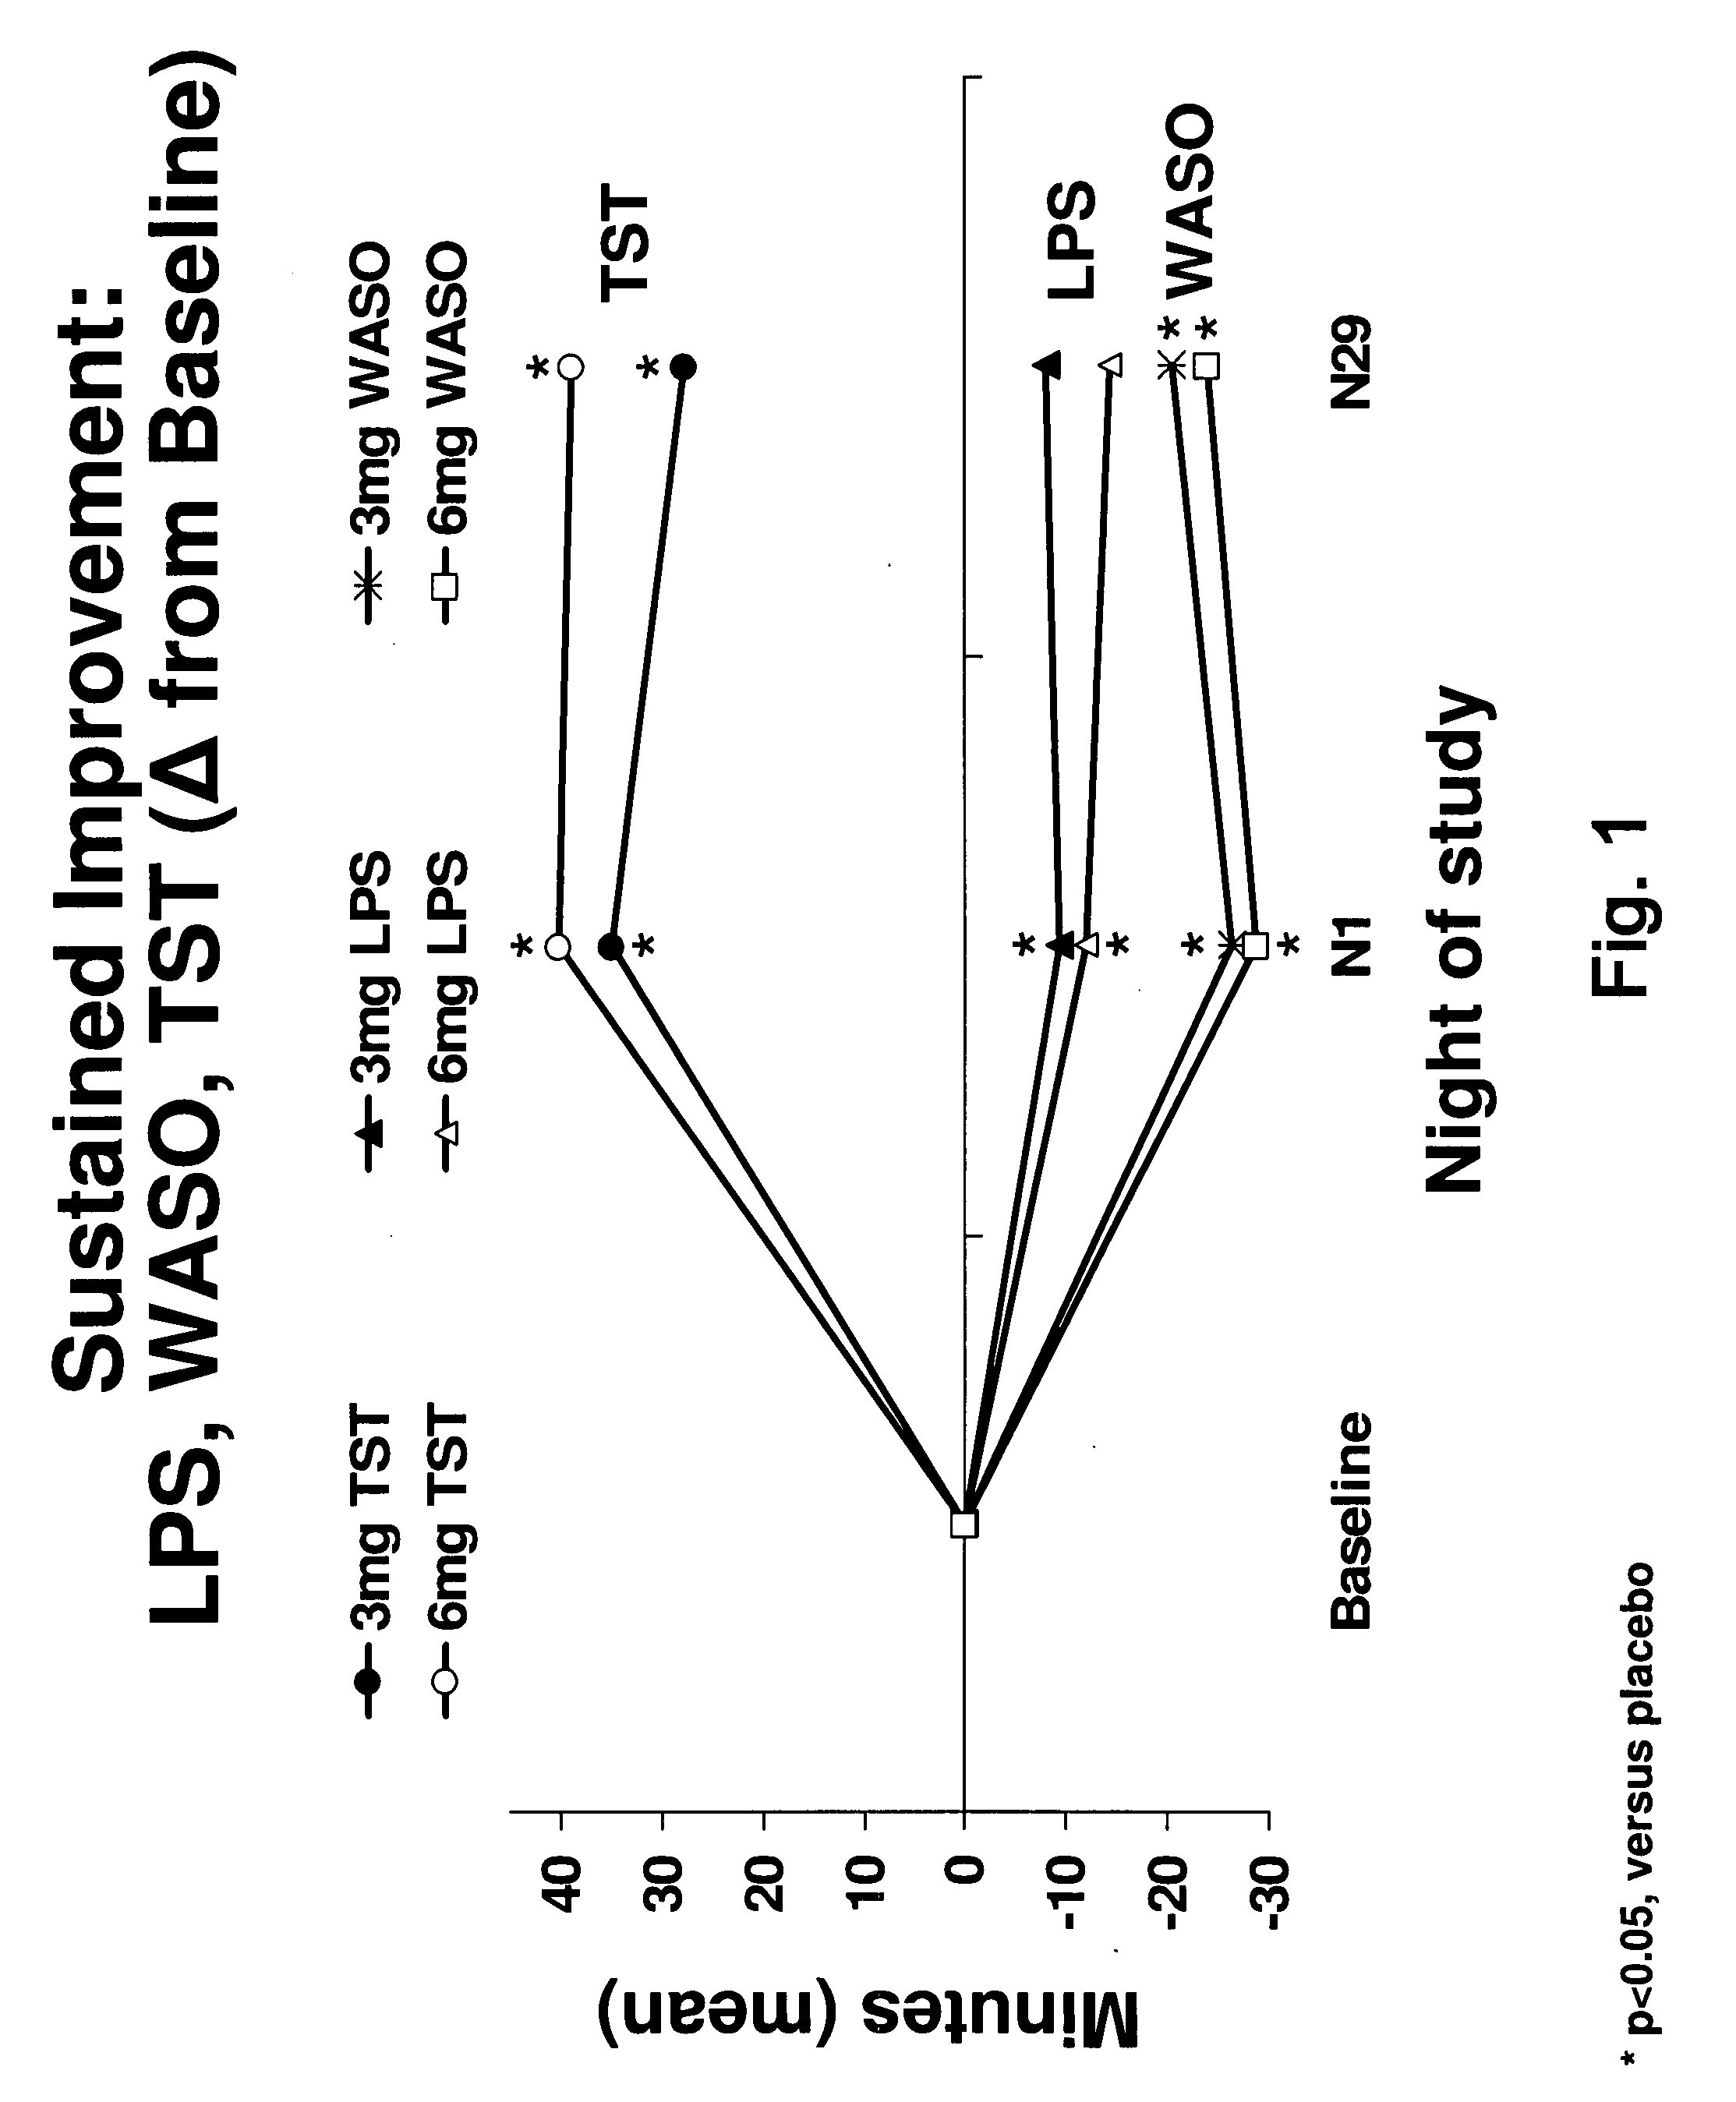 Methods of using low-dose doxepin for the improvement of sleep